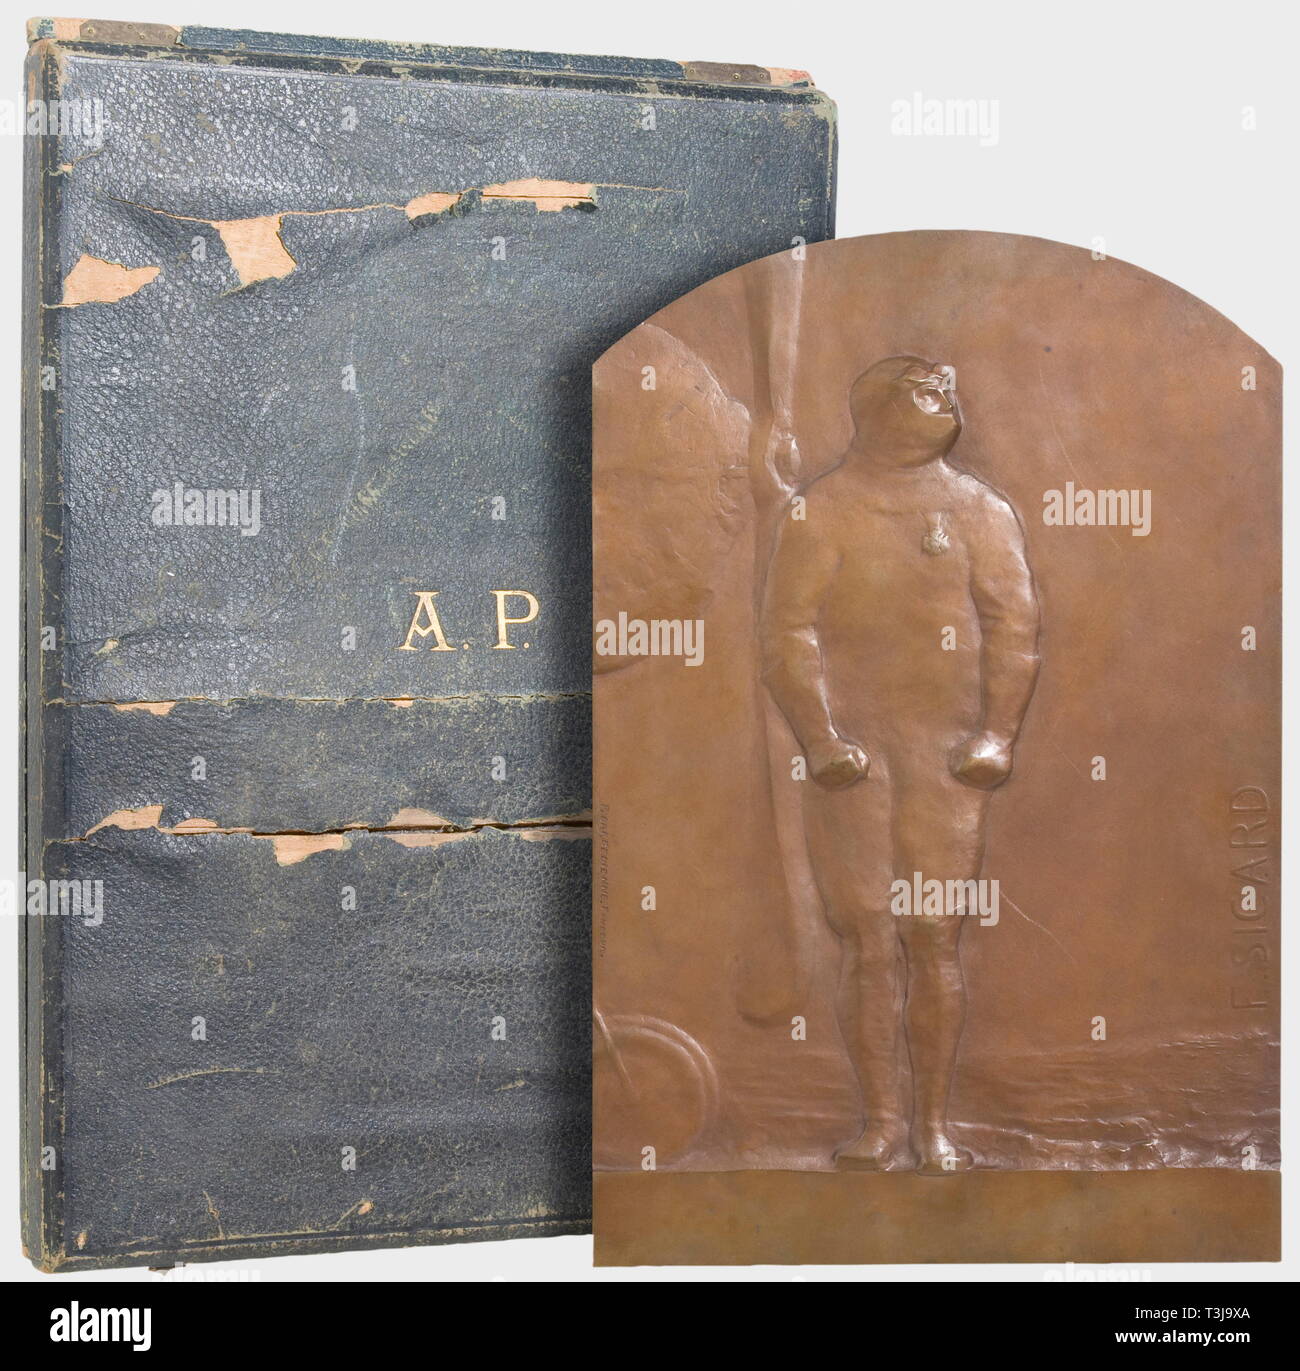 Armand Pinsard (1887 - 1953), an honour gift A large bronze plaque depicting a pilot in overalls with the Croix de Guerre. Signed 'F. Sicard' on the edge with the founder's signature 'F. Barbedienne. Fondeur'. Dimensions 43 x 28.5 cm. In a damaged green case upon which are the initials 'A.P.' in gold letters. historic, historical, 1910s, 20th century, troop, troops, armed forces, military, militaria, army, wing, group, air force, air forces, object, objects, stills, clipping, clippings, cut out, cut-out, cut-outs, Additional-Rights-Clearance-Info-Not-Available Stock Photo